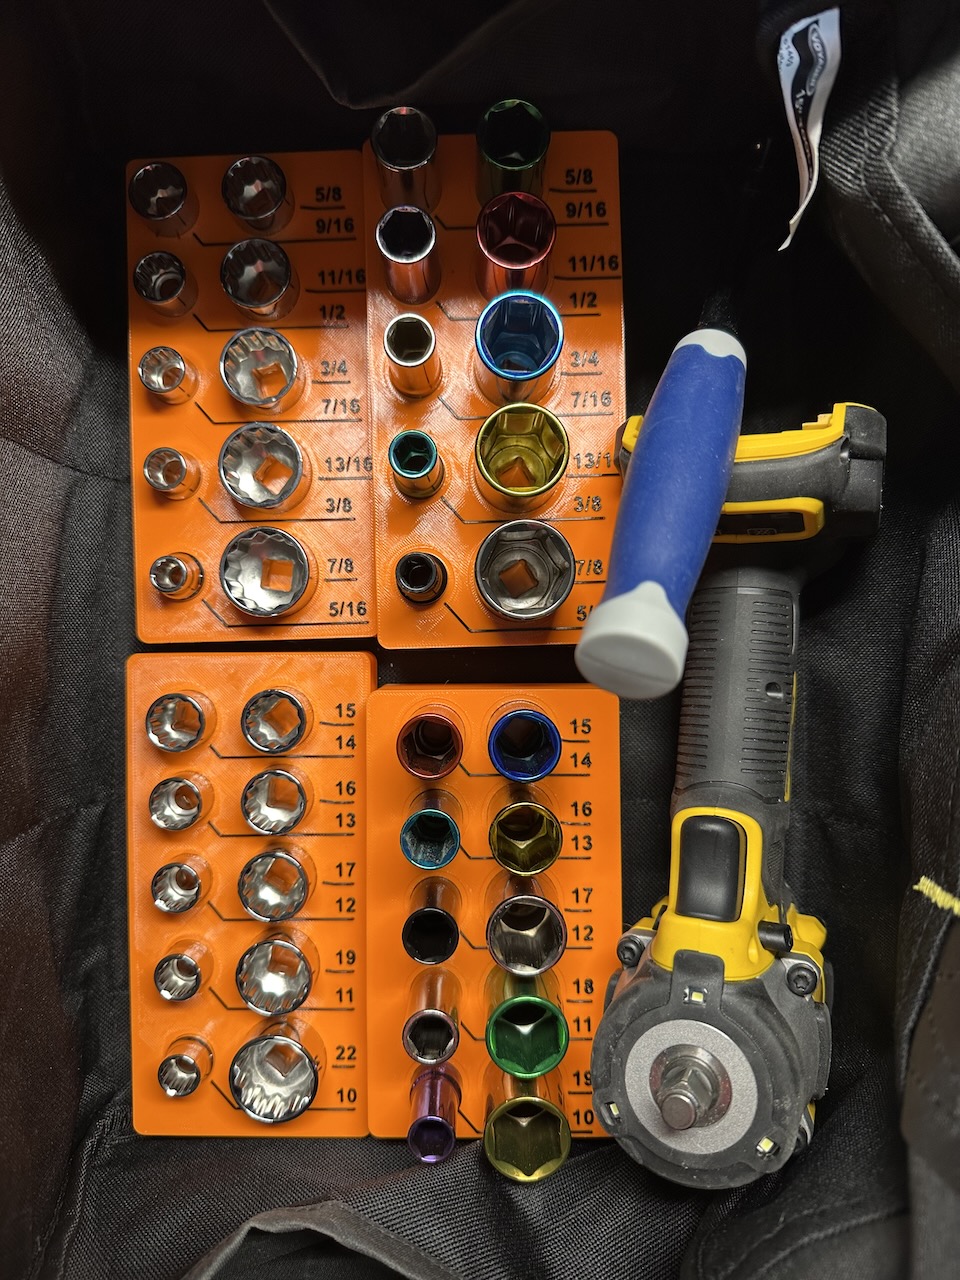 The resulting 4 socket organizers at home in their tool bag